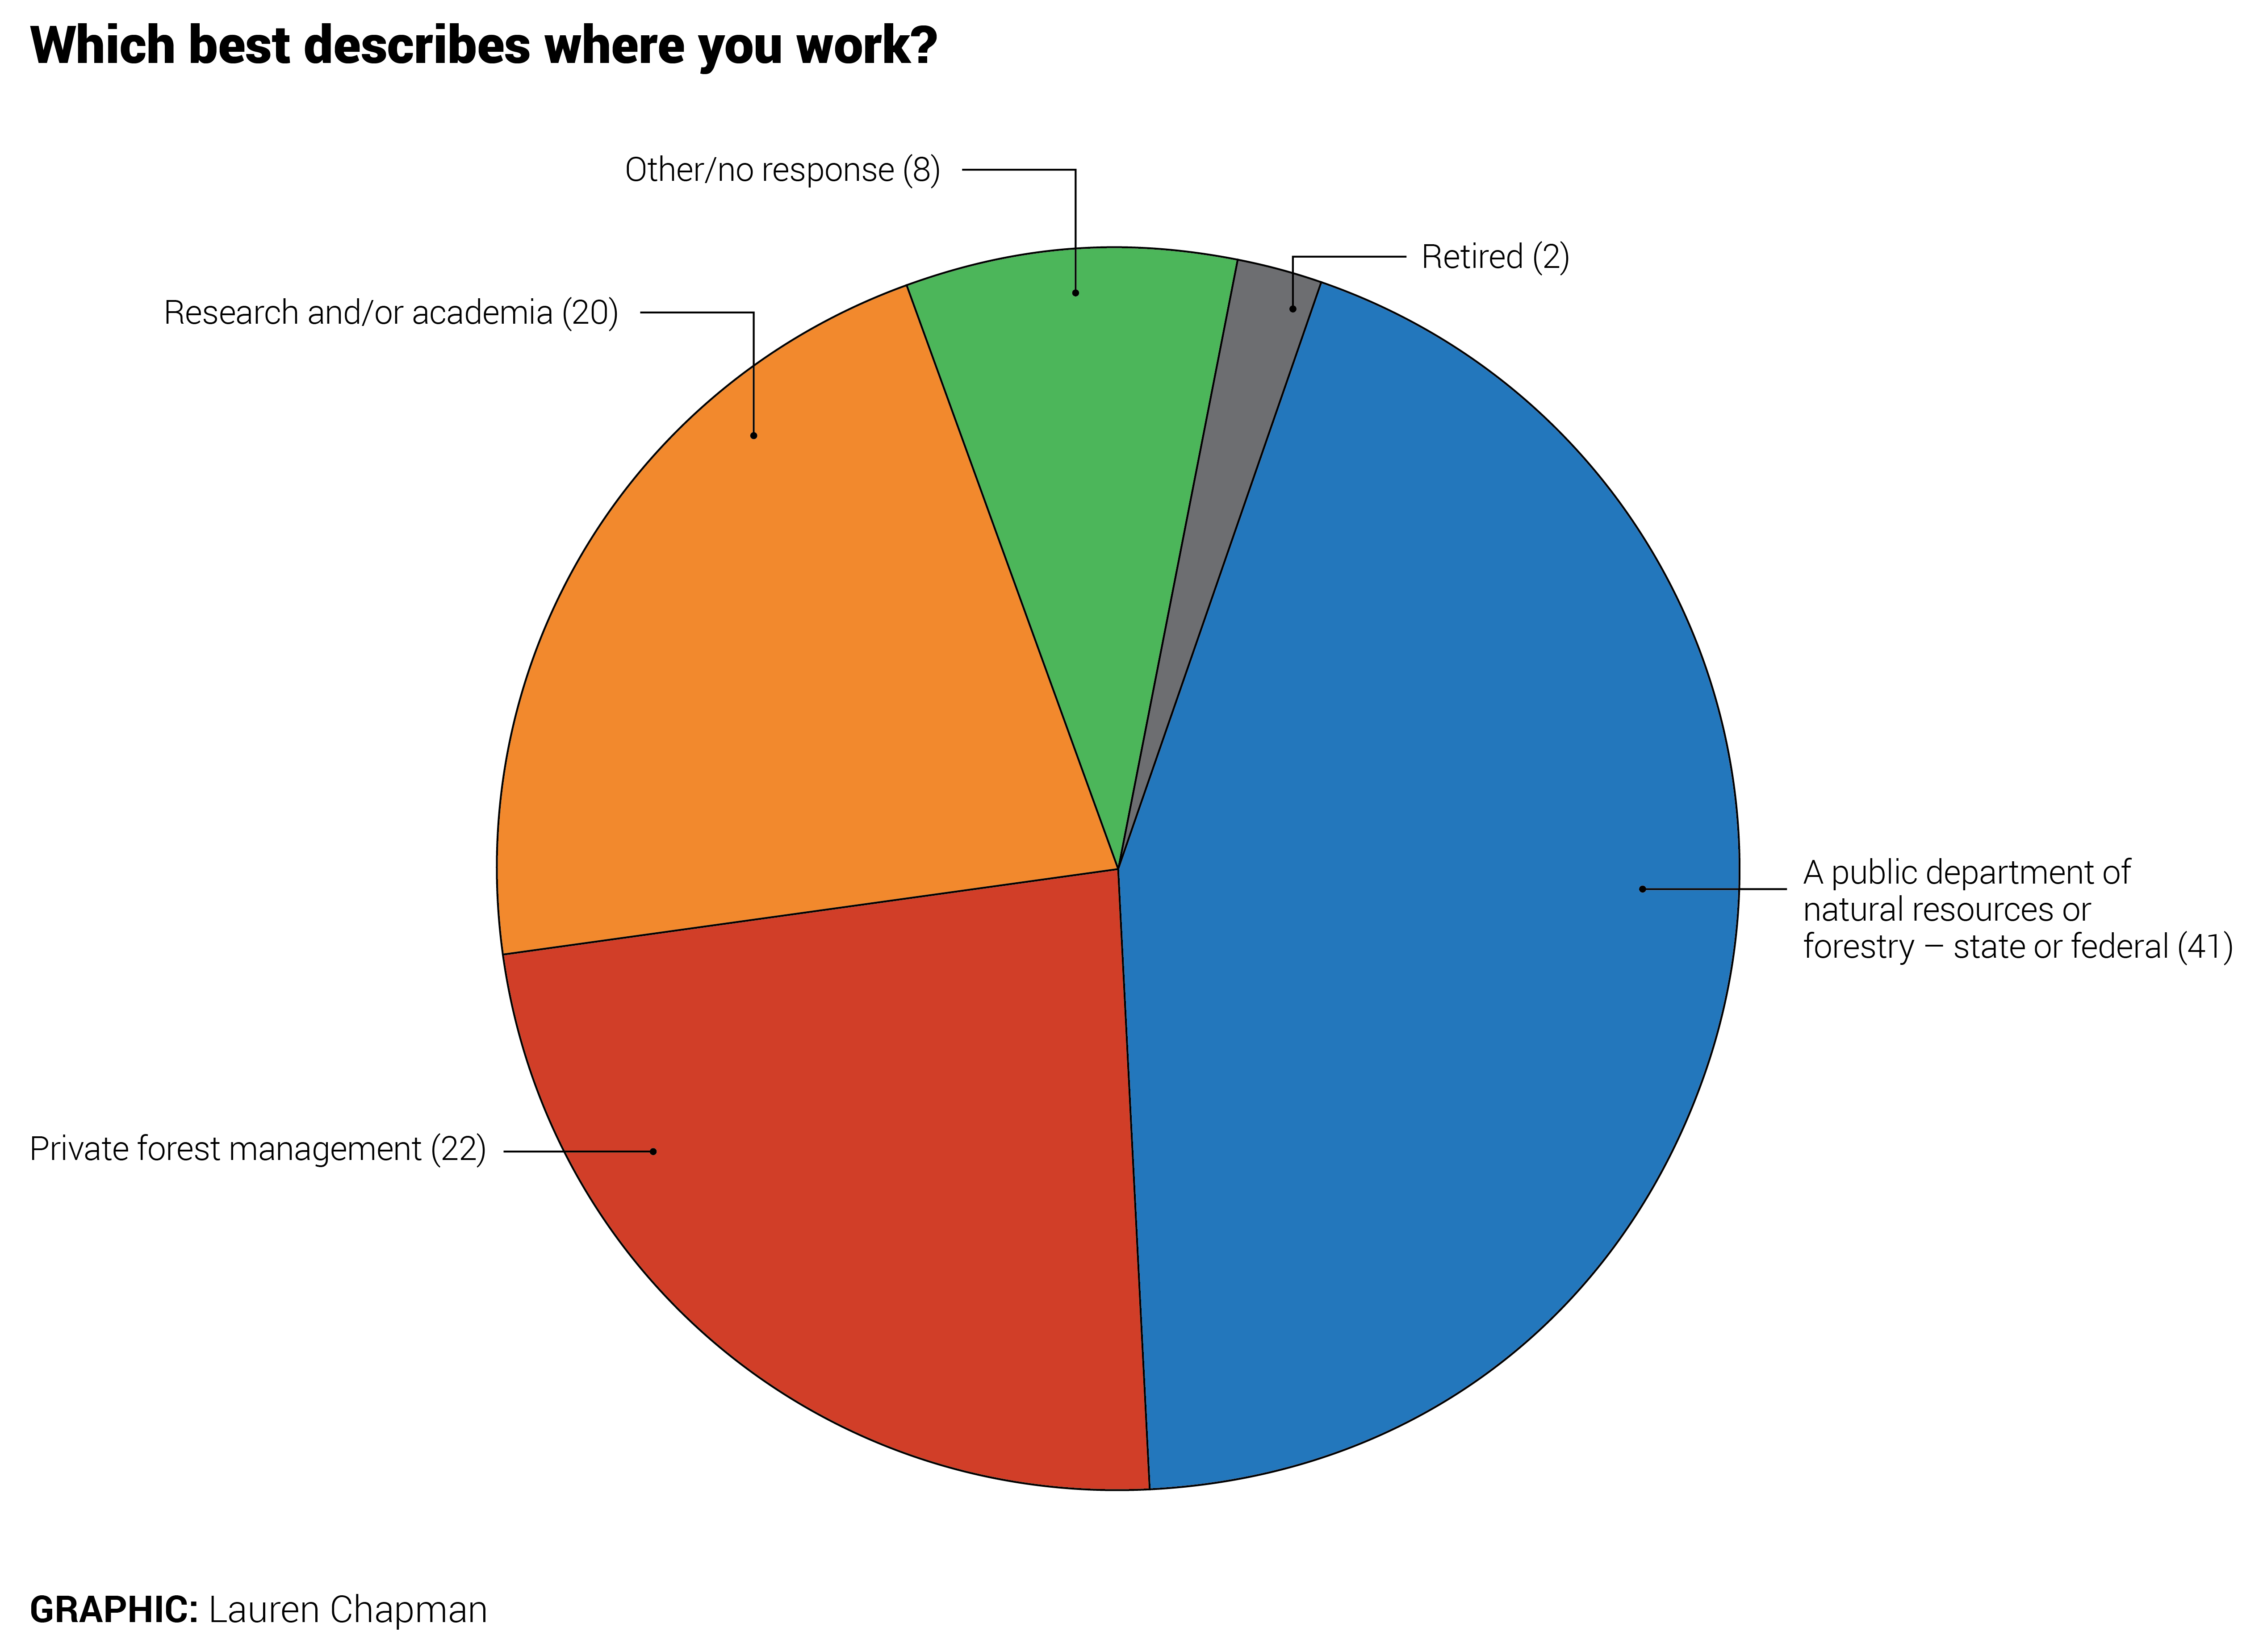 Which best describes where you work? 41 say public department of natural resources
    or forestry – state or federal. 22 say private forest management. 20 say research and/or academia. 8 say other or did not respond. And 2 are retired.